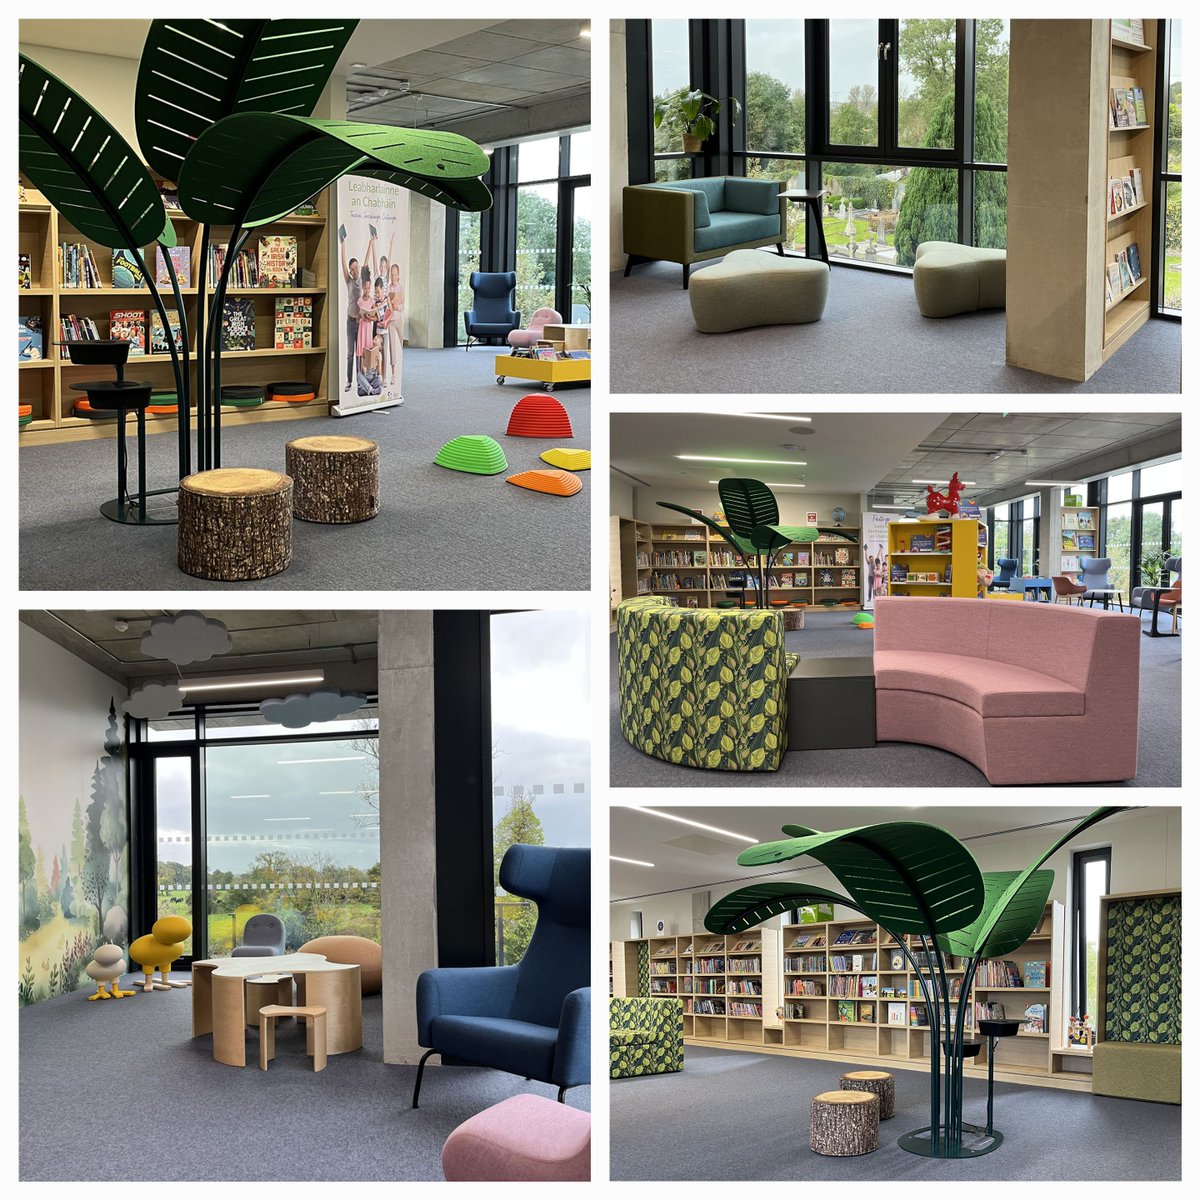 EXTRAORDINARY PLACES MAKE EXTRAORDINARY PEOPLE. The library - a magical space for innovation, ideas, creativity, collaboration and play. We design extraordinary spaces for your extraordinary communities! Need inspiration? #libraries #librarydesign thedesignconcept.co.uk/inspiration/